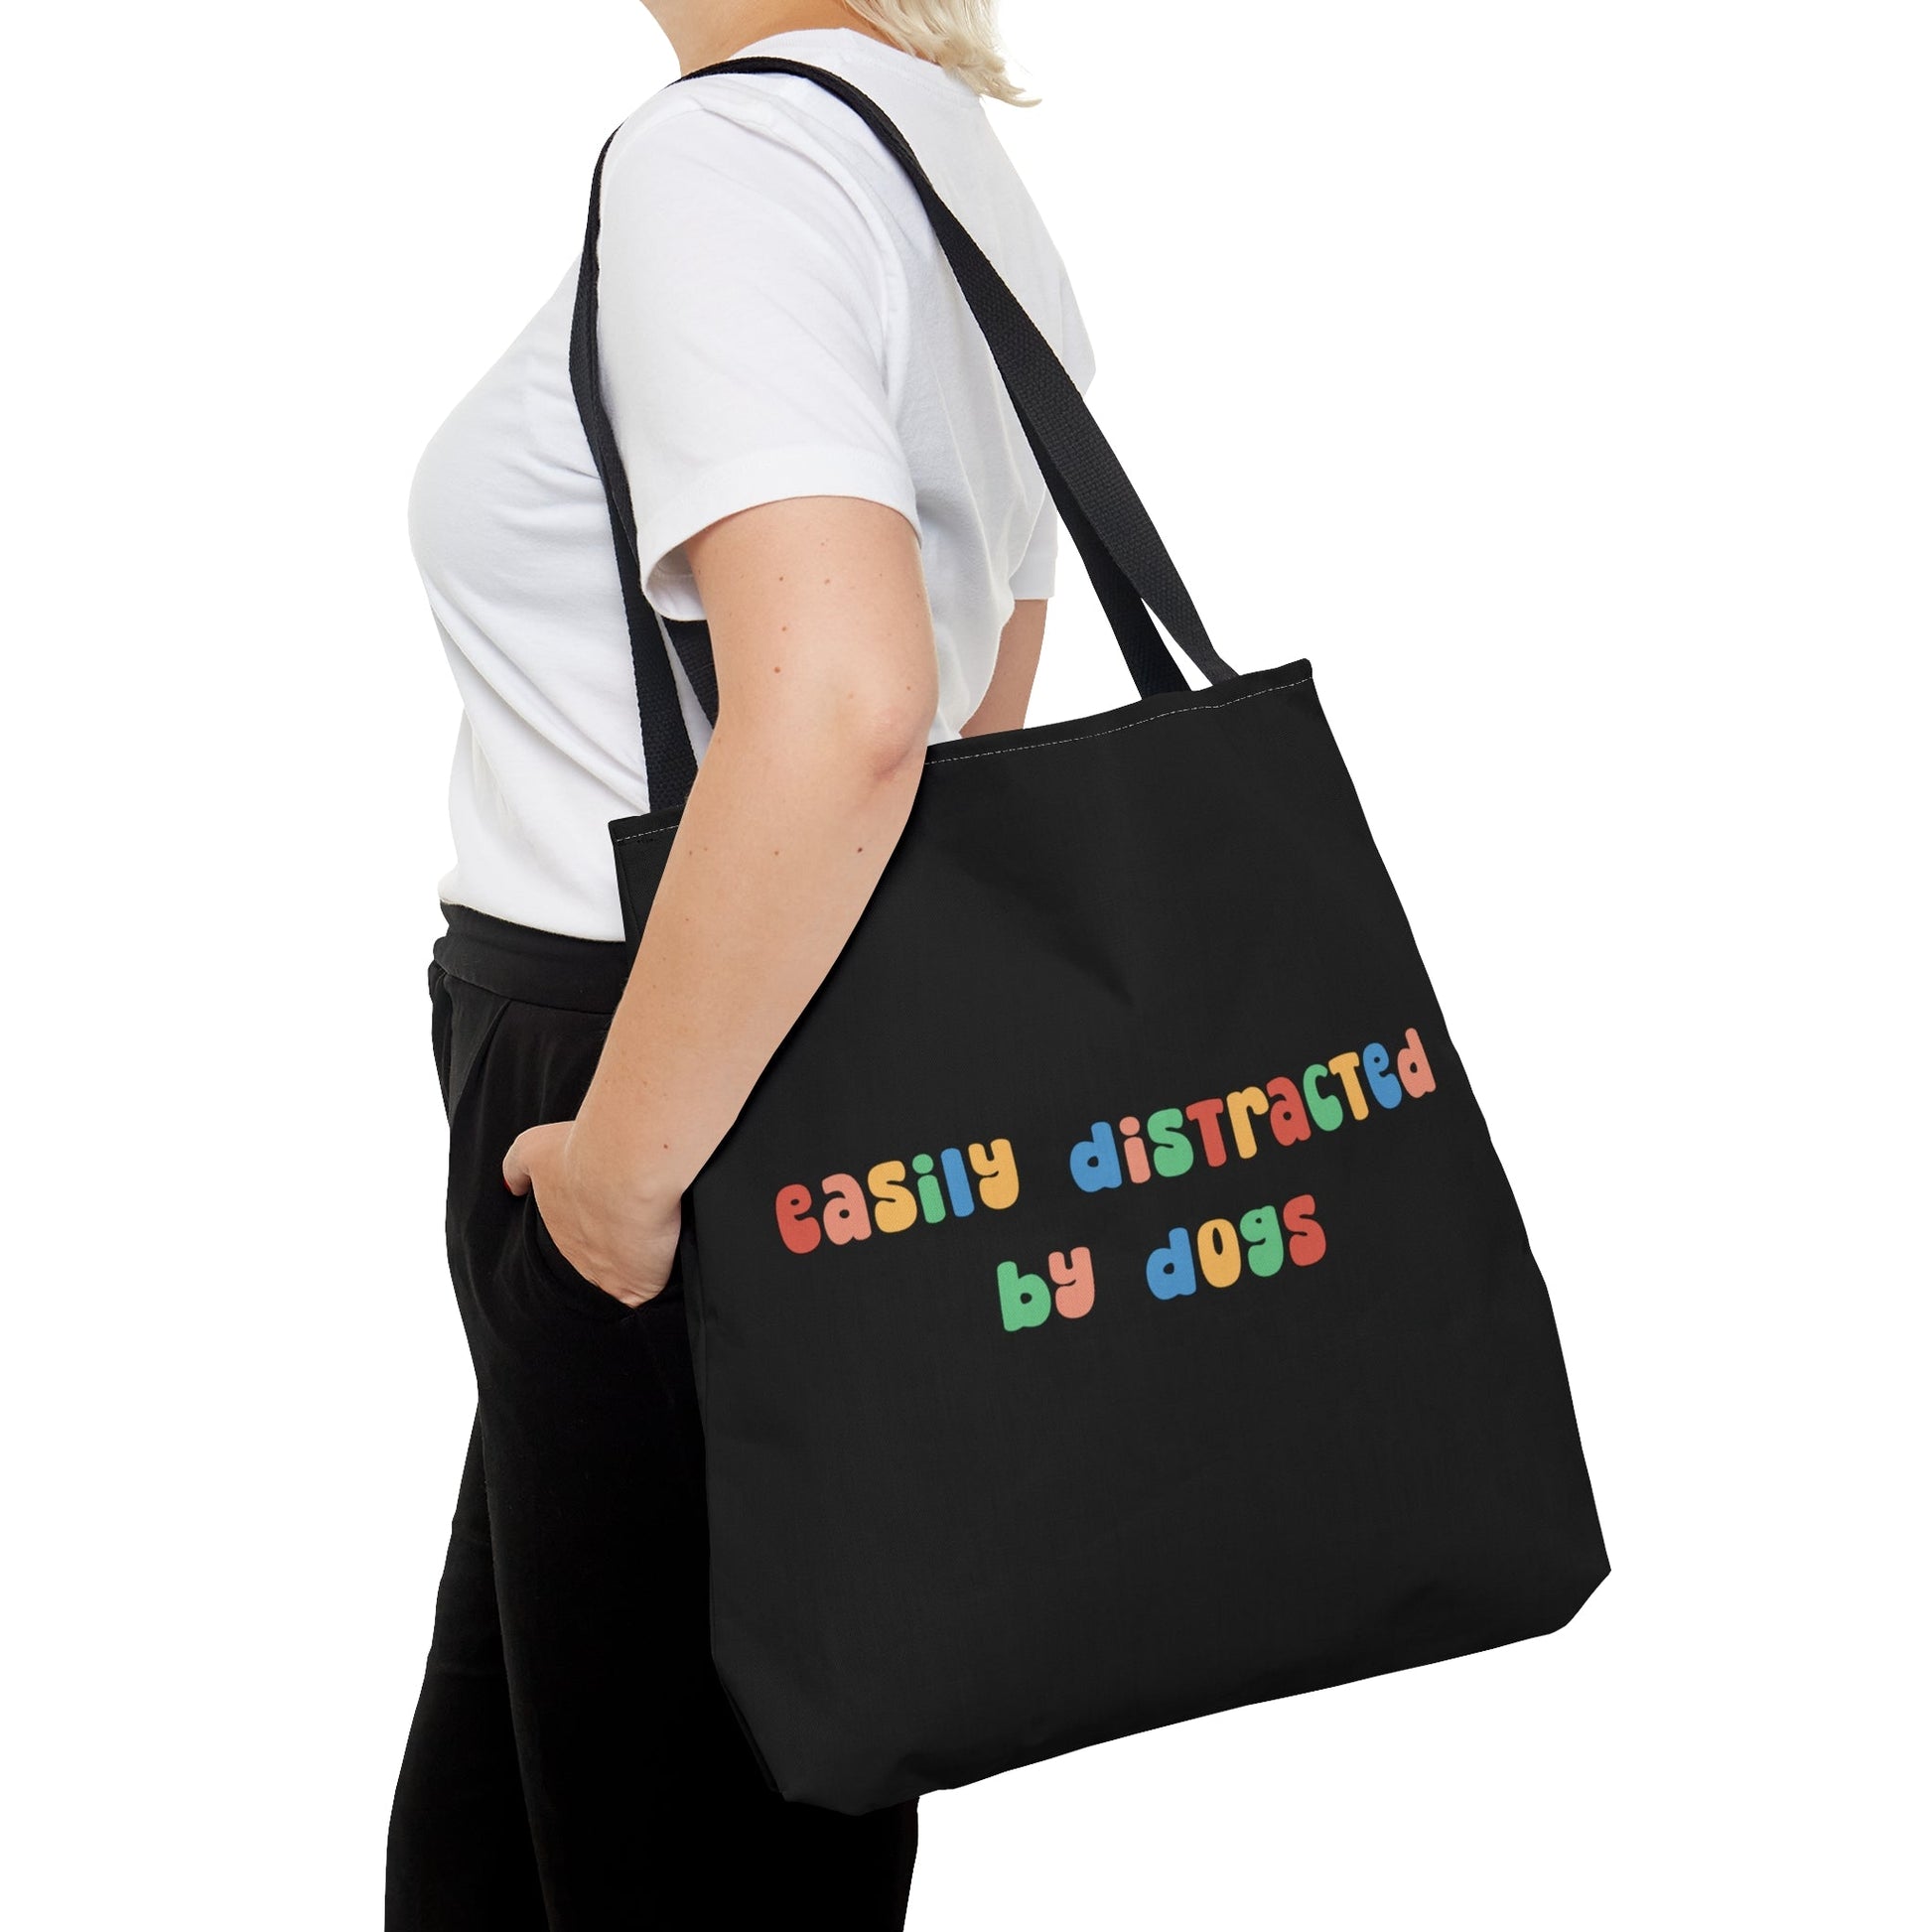 Easily Distracted by Dogs | Tote Bag - Detezi Designs-26524432369030405289